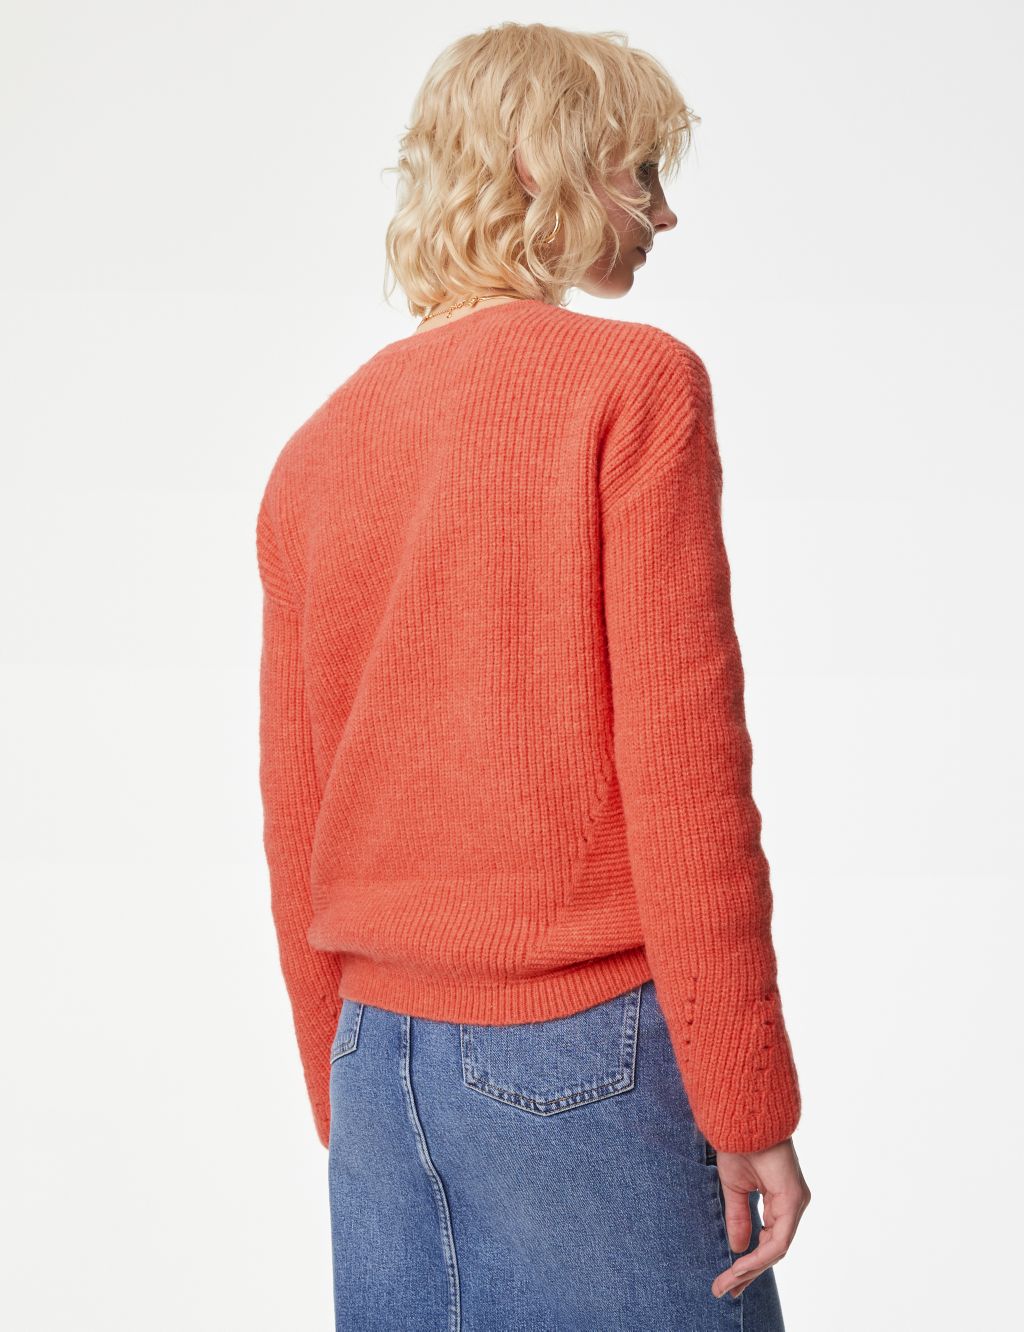 Pointelle Round Neck Jumper with Wool image 5